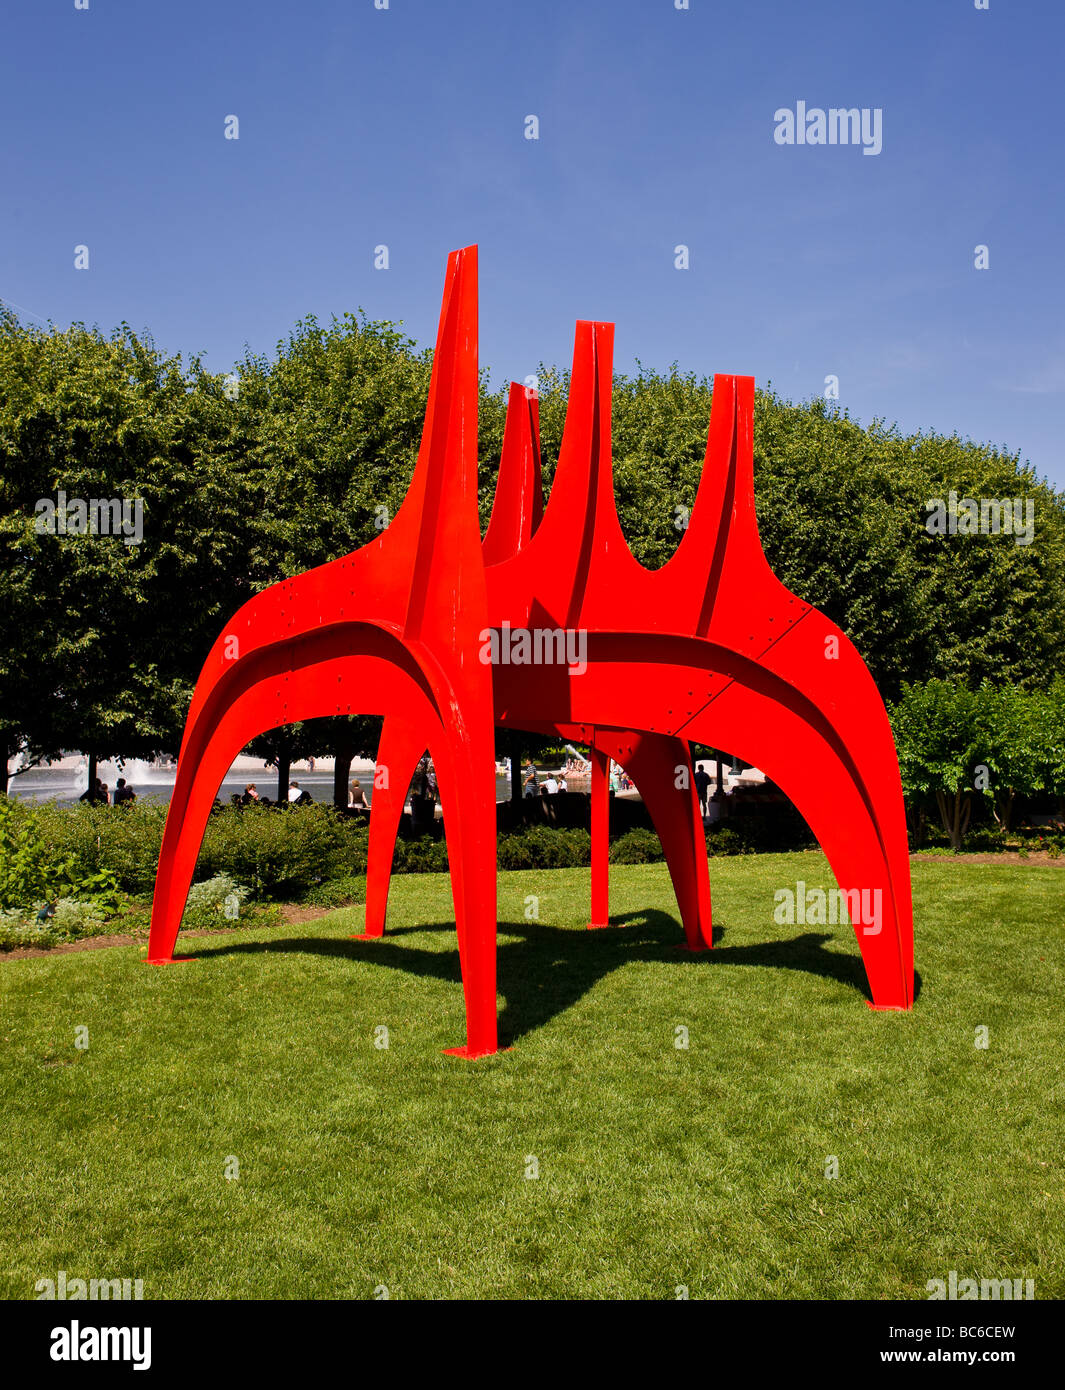 WASHINGTON DC USA Cheval Rouge sculpture by Alexander Calder in the National Gallery of Art Sculpture Garden Stock Photo